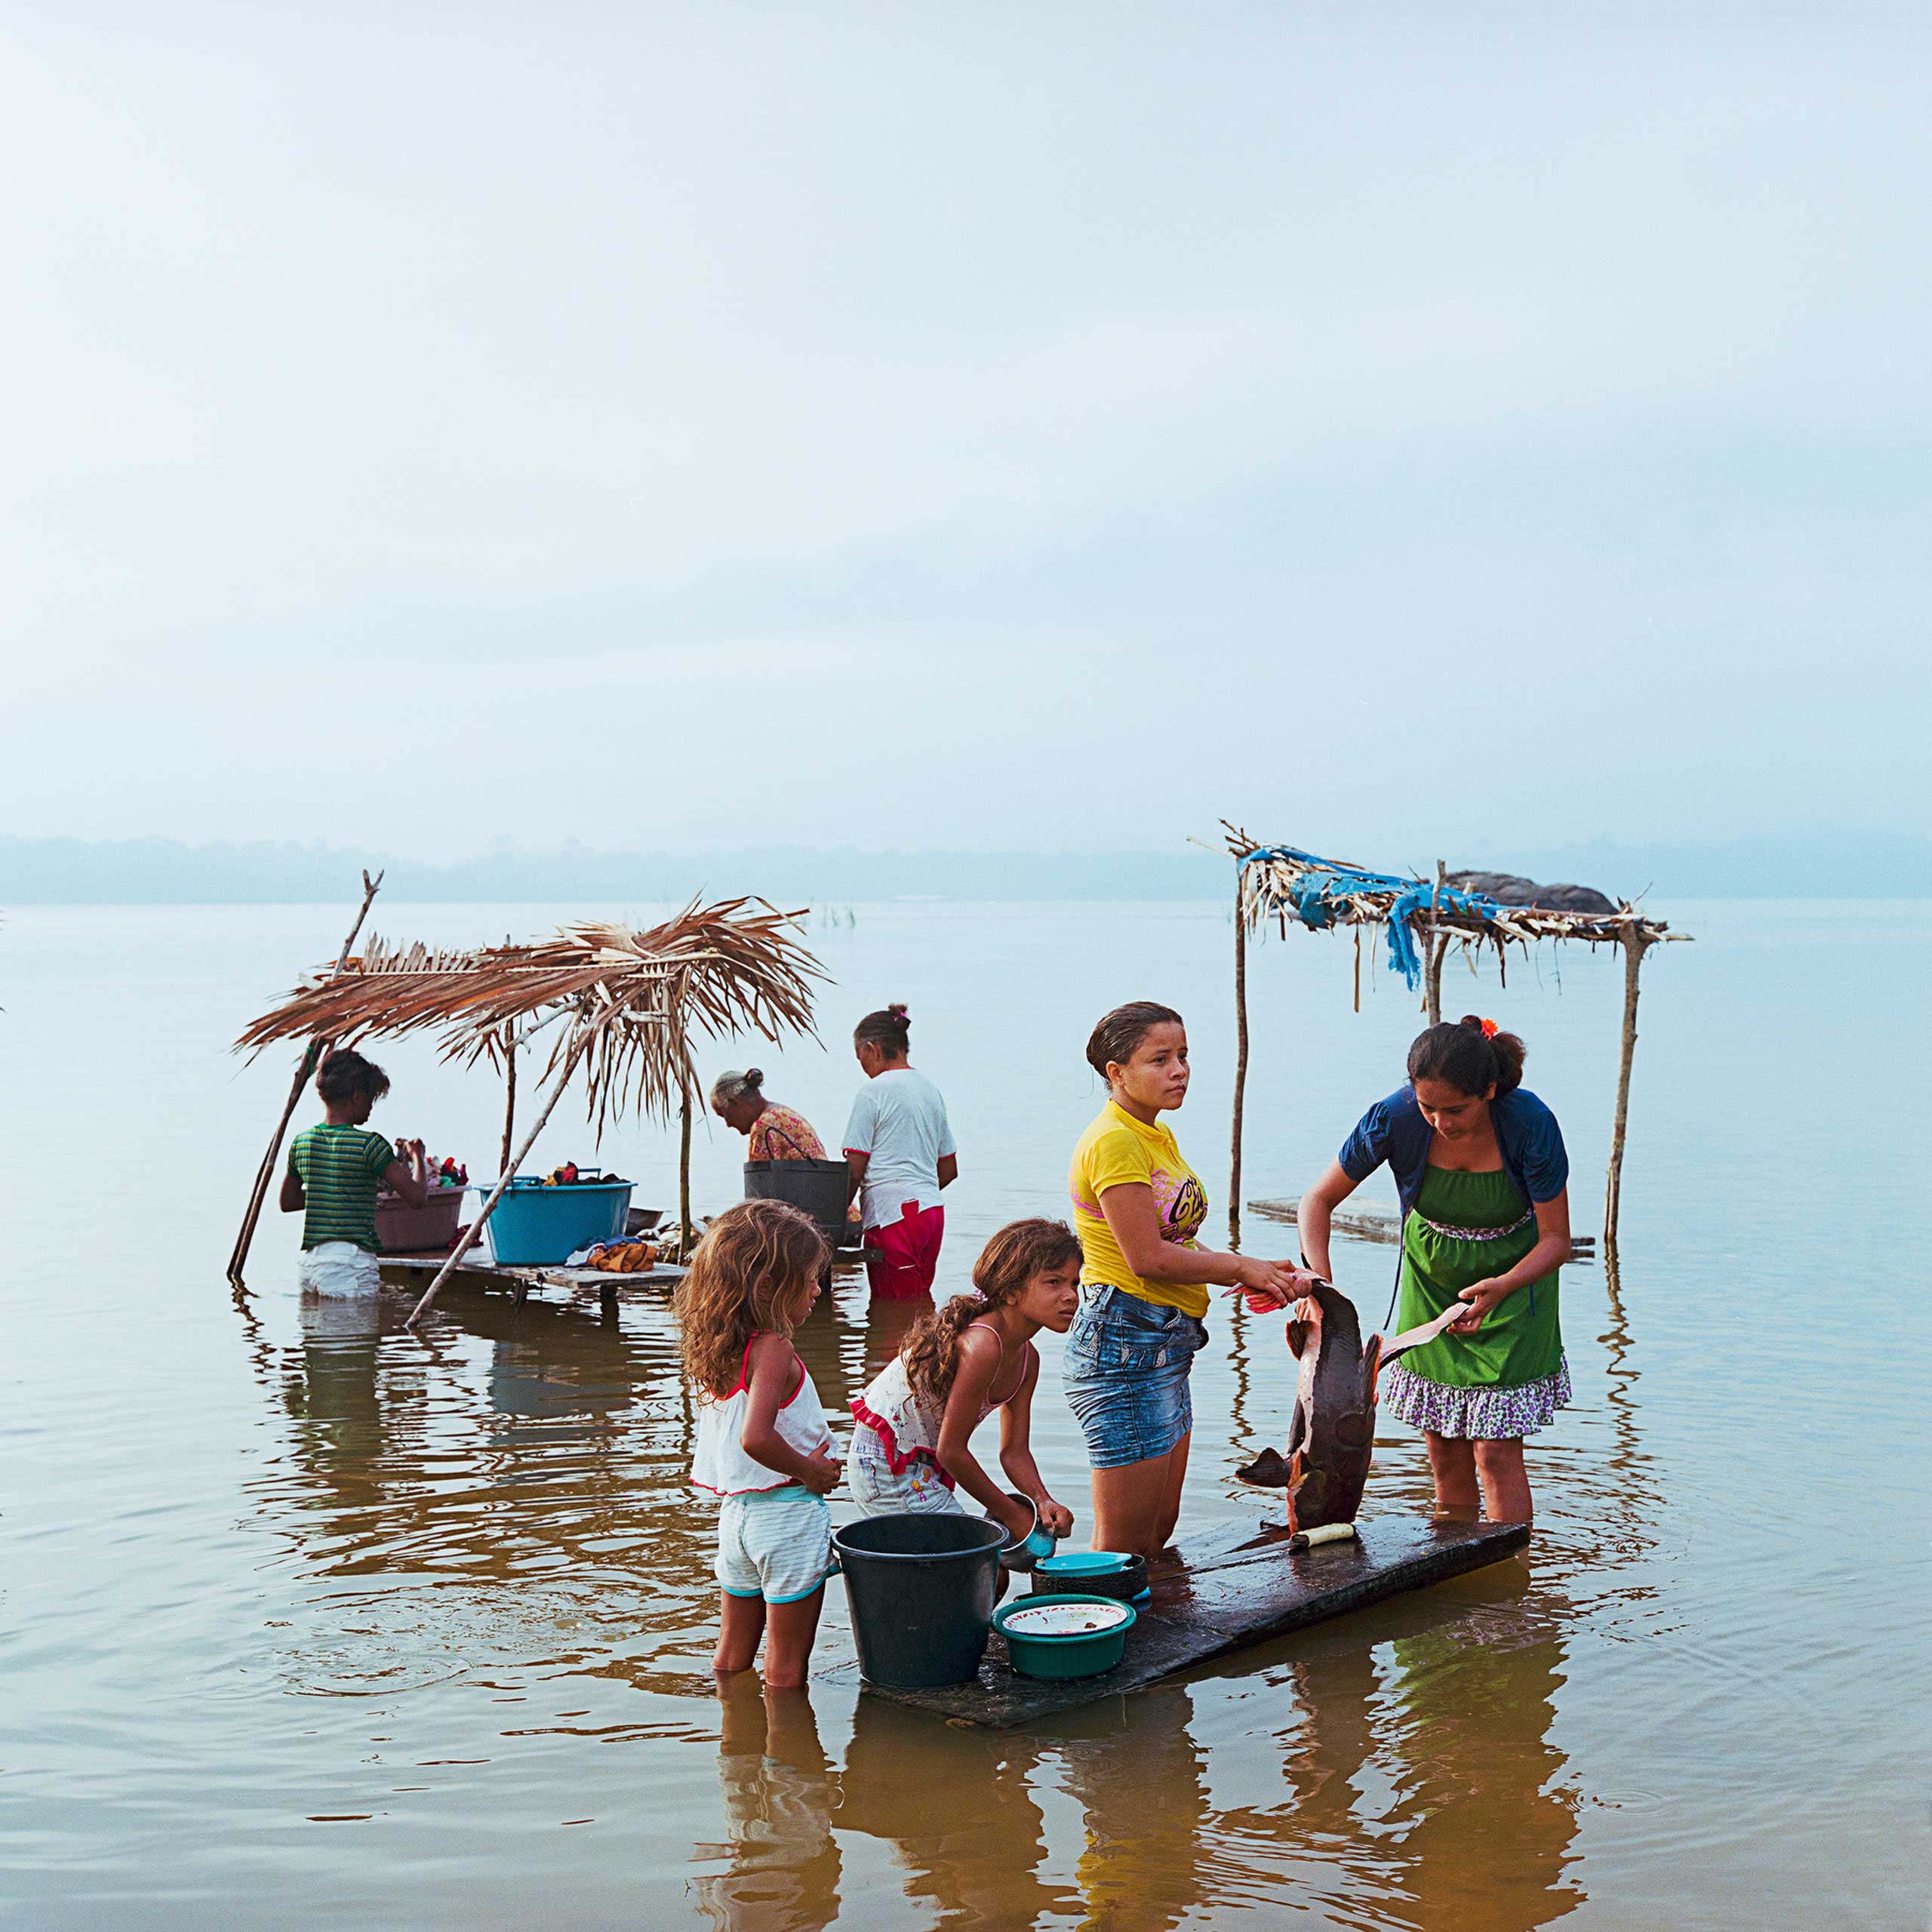 A Ribinerio family from the traditional riparian village of Mangabal on the Tapajos River. The village is threatened by a proposed major hydroelectric complex that would flood their land forcing them to move to the nearby city of Itaituba, Dec. 2014.